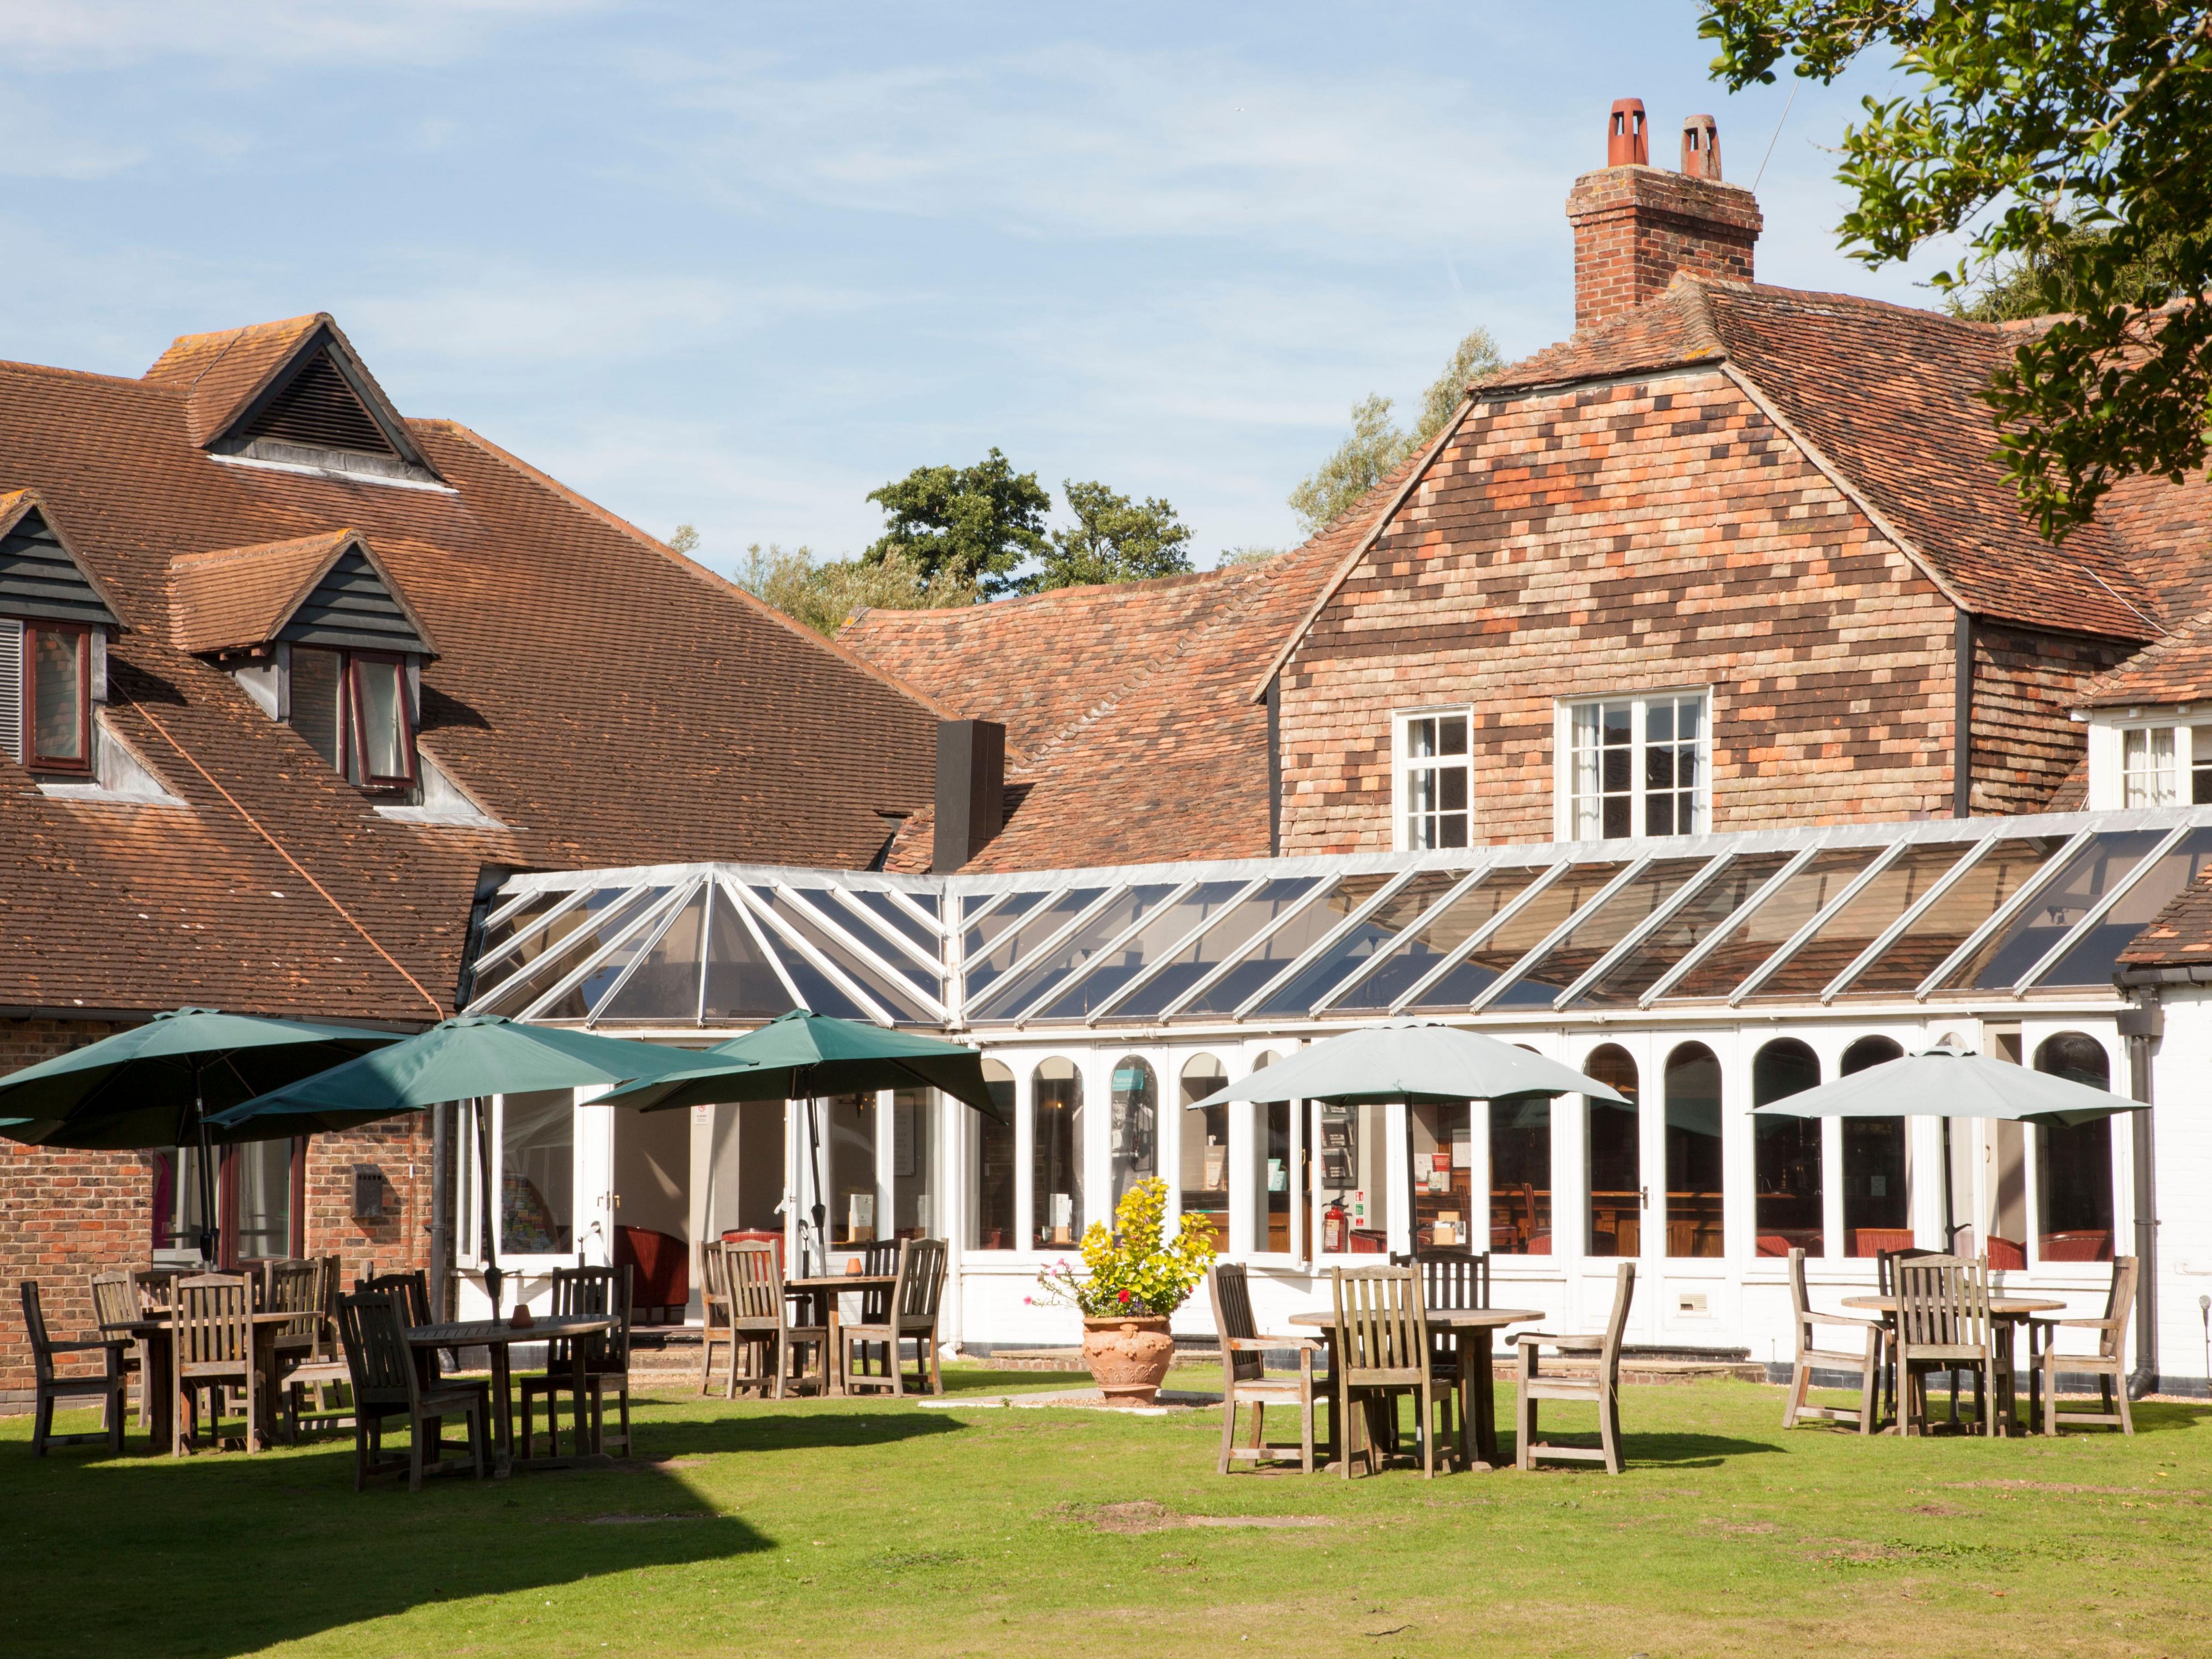 A warm and friendly welcome awaits you at the Holiday Inn Ashford Central’s Bybrook Tavern with a mouth-watering range of dishes available. Al fresco dining is also available in the warmer months of the year.
